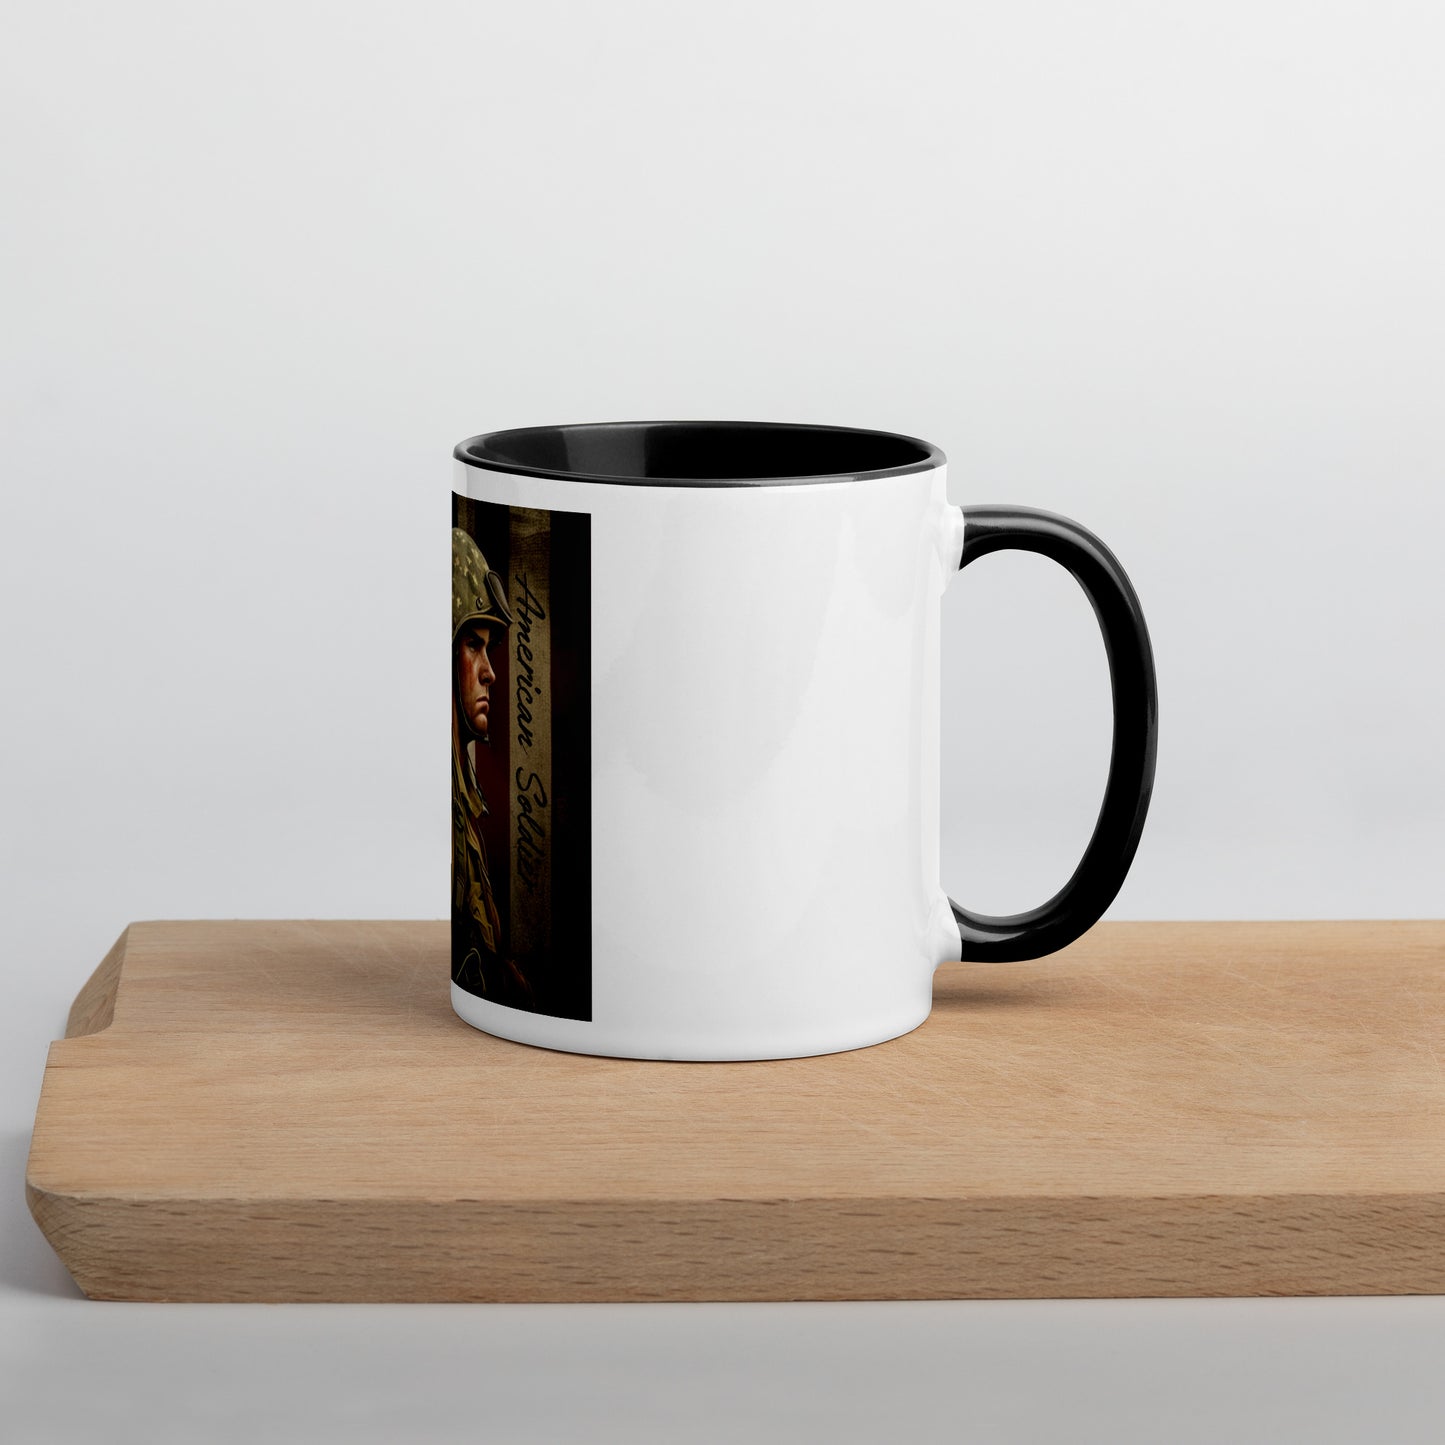 "American Solider" Coffee Mug - Weave Got Gifts - Unique Gifts You Won’t Find Anywhere Else!